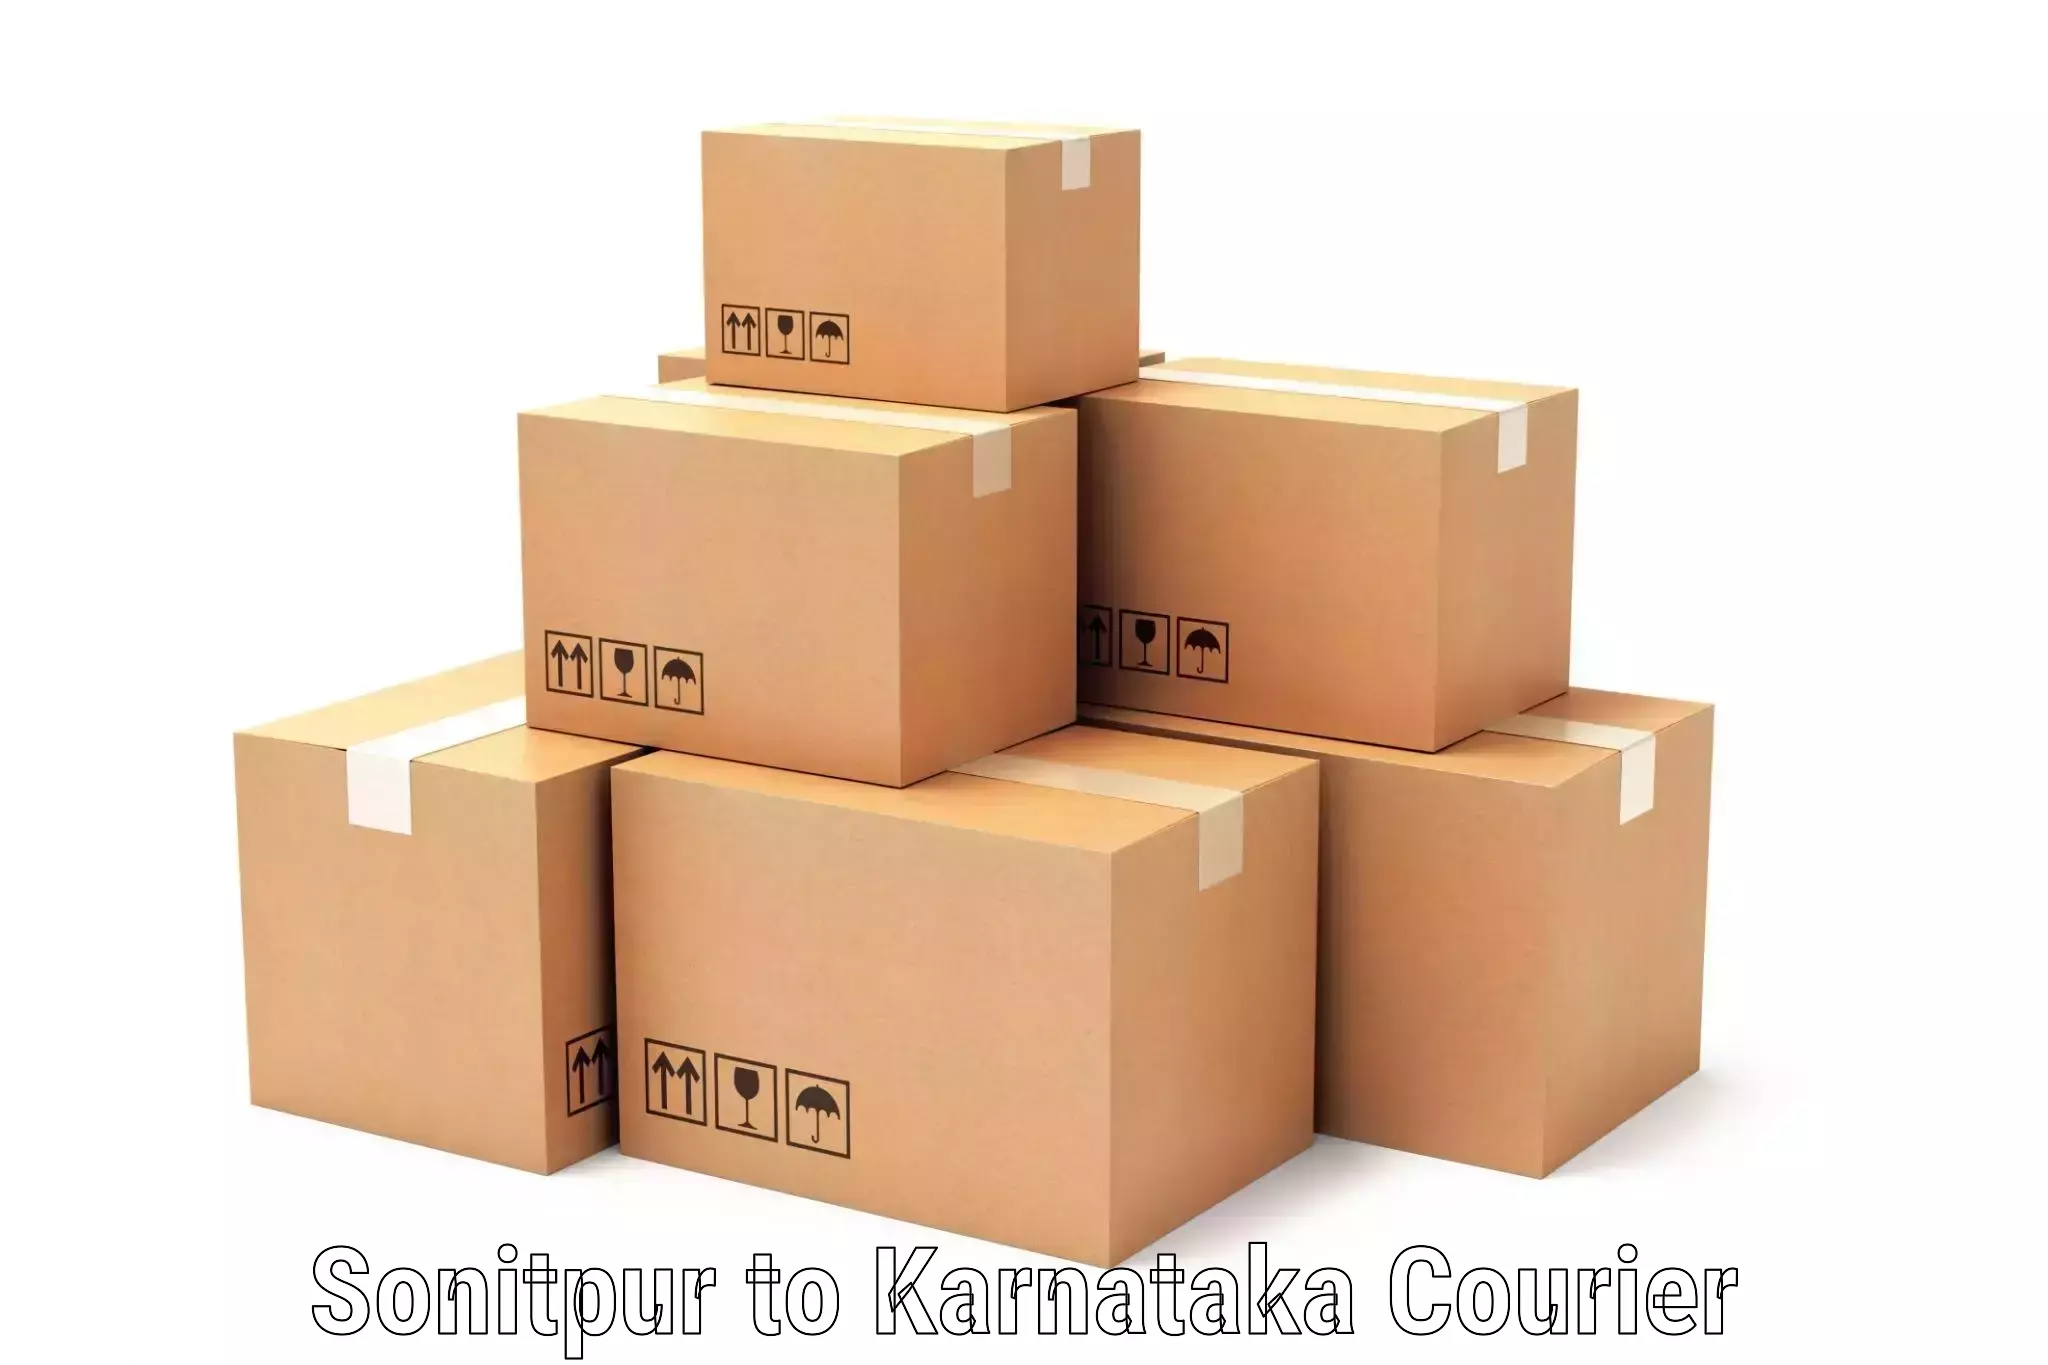 Cash on delivery service Sonitpur to Karnataka